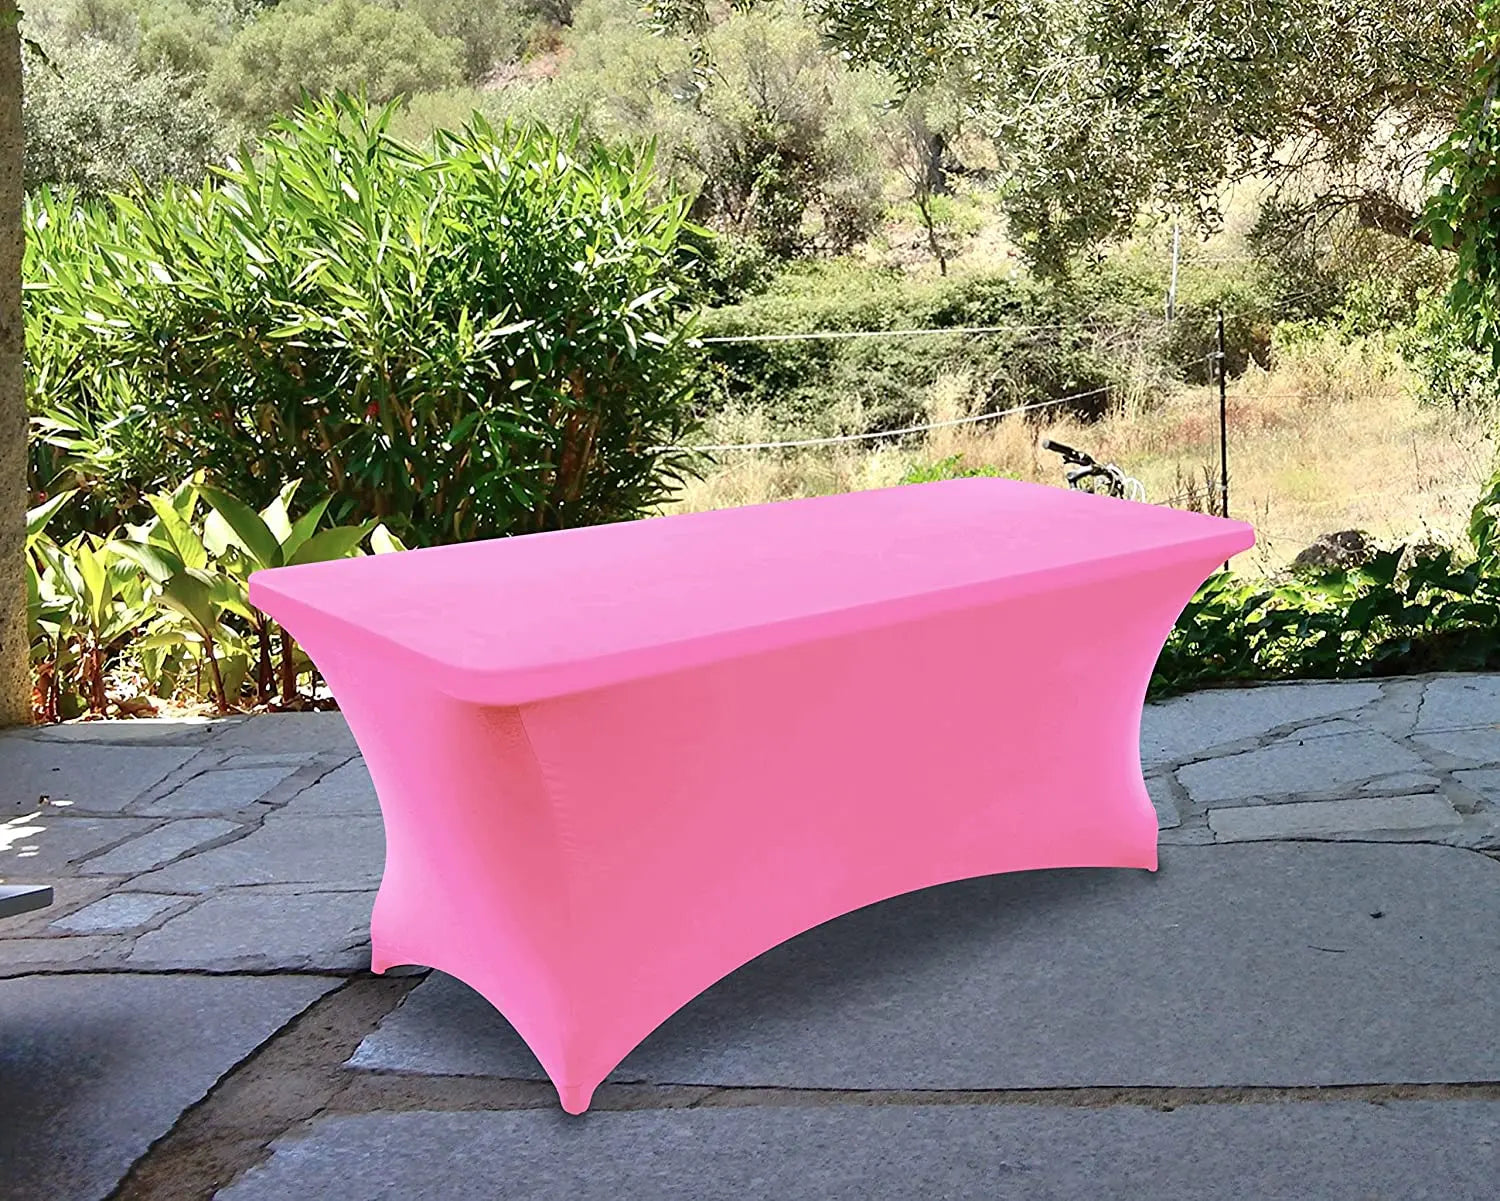 Table Cover Stretchable Tight Fit Spandex Table Cover for Event & Parties - Fast Forward